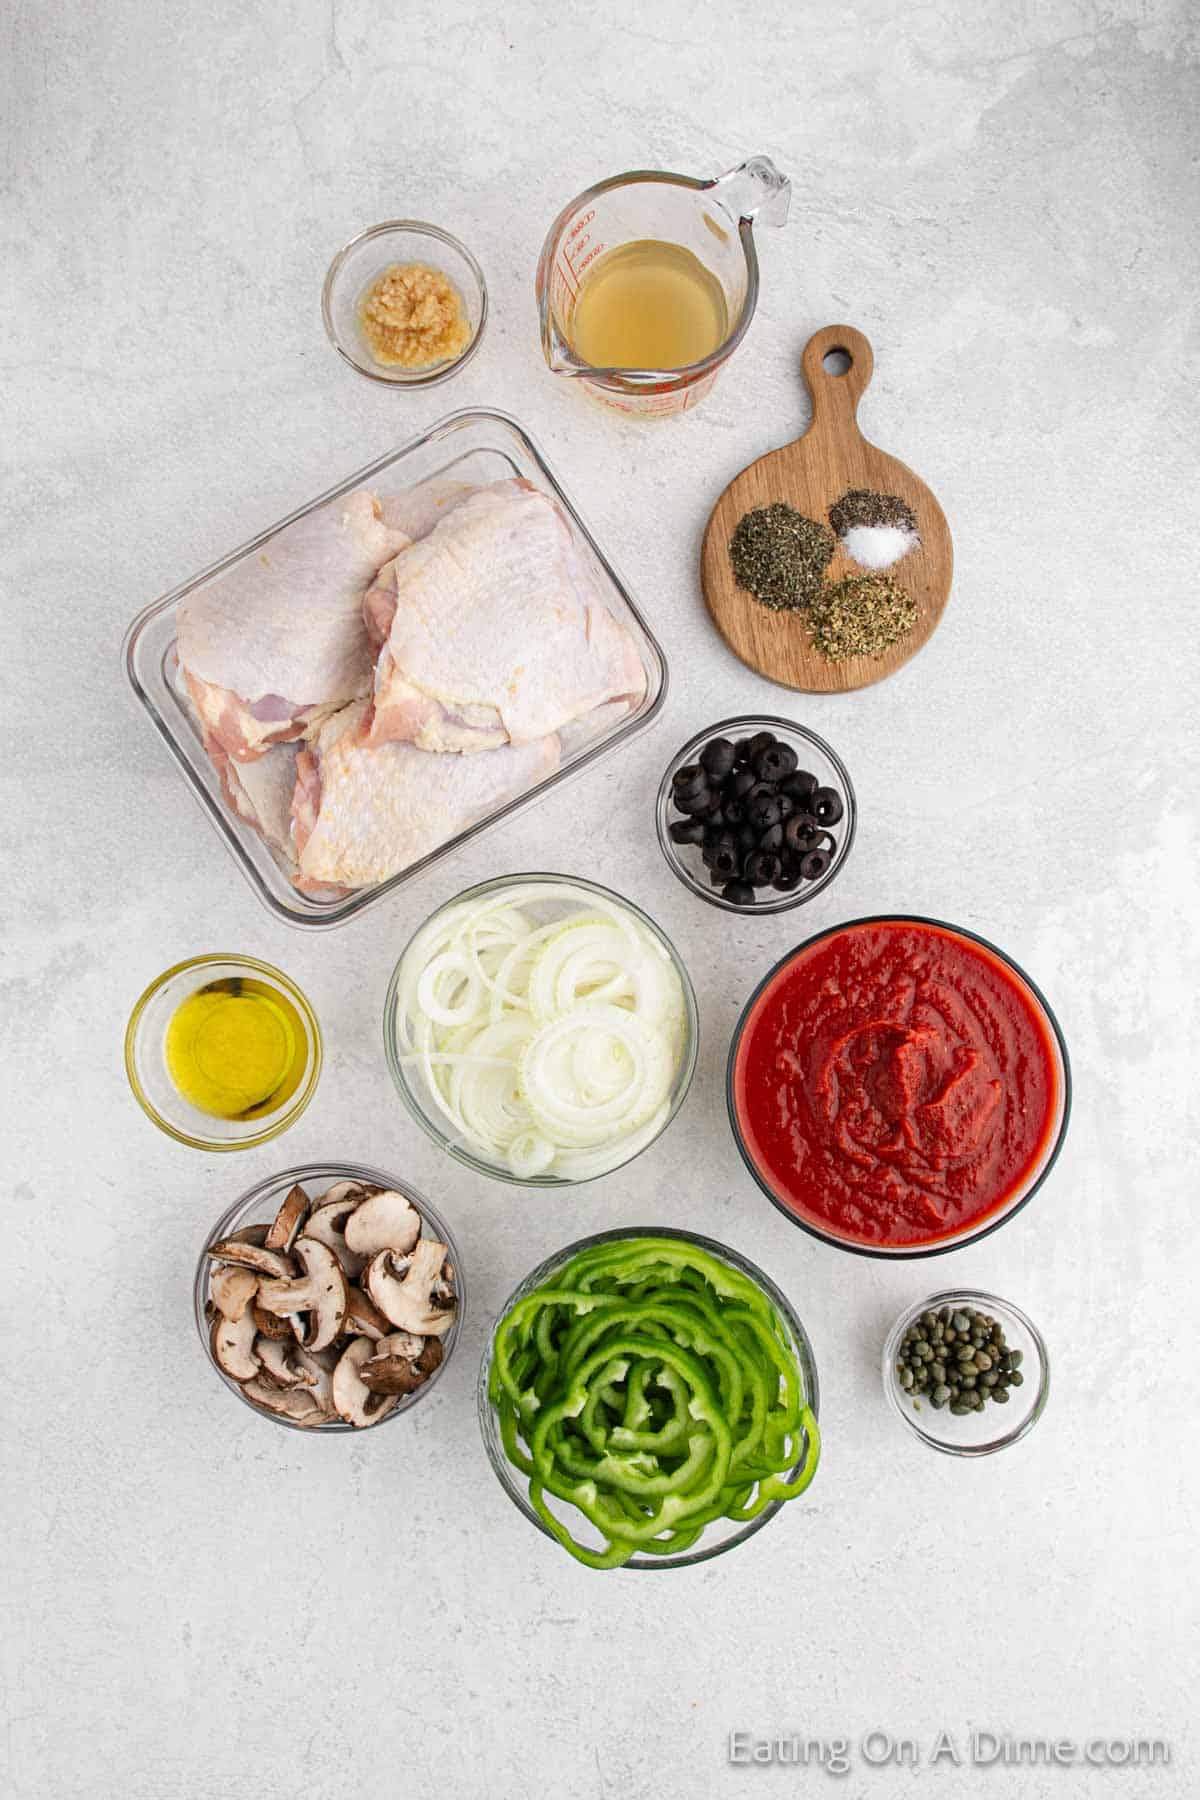 Chicken Cacciatore ingredients - chicken thighs, salt and pepper, olive oil, onion, bell peppers, garlic, mushrooms, crushed tomatoes, chicken broth, dried oregano, dried basil, black olives, capers, fresh parsley